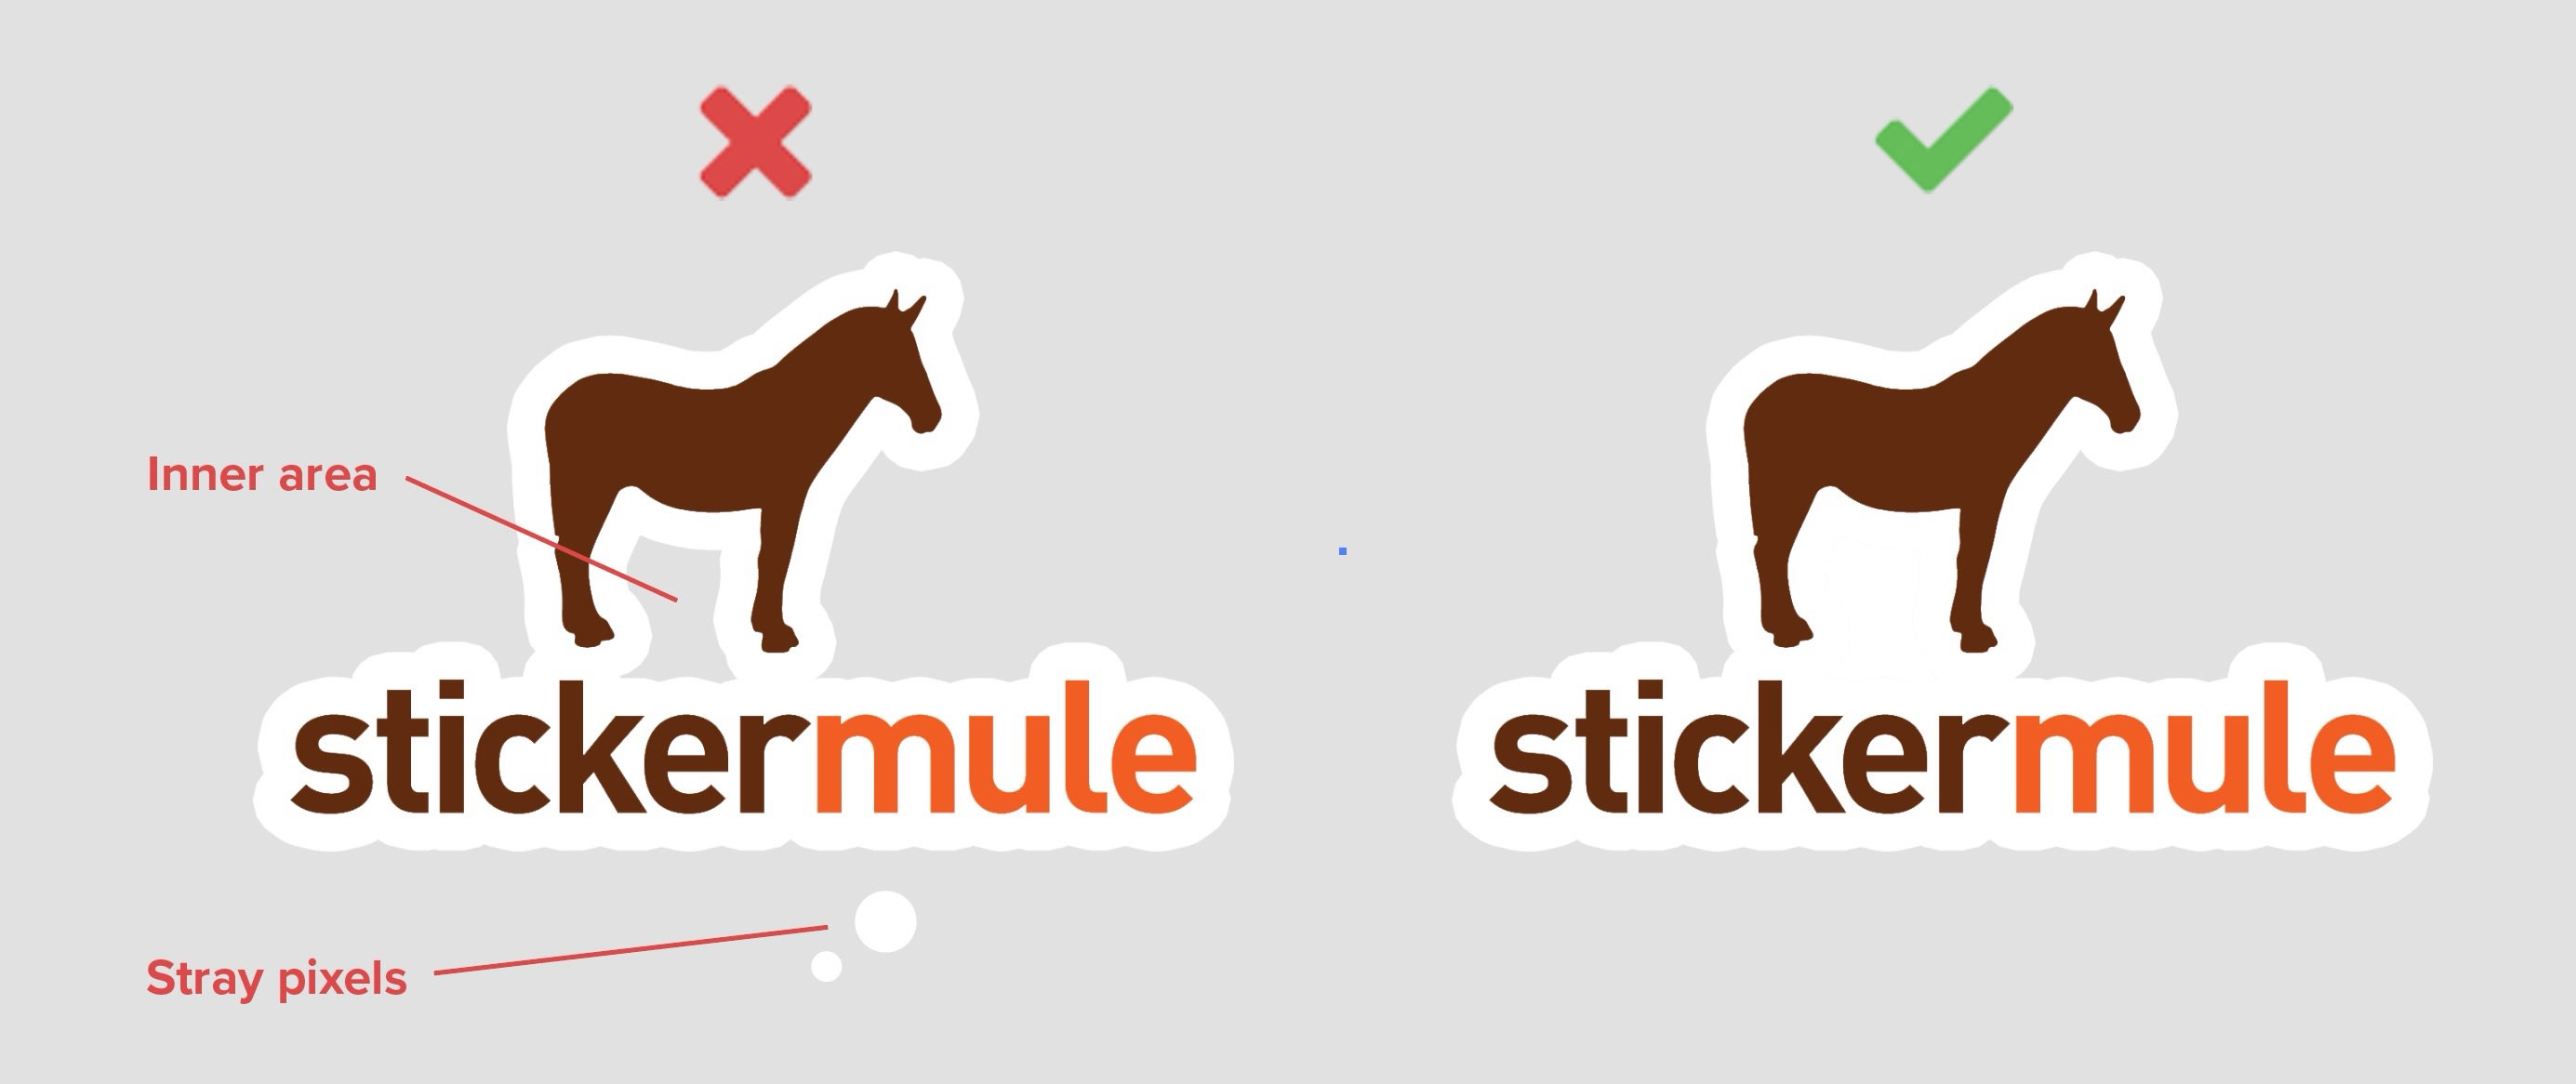 image of the sticker mule logo showing the difference between inner cuts removed and kept in photoshop